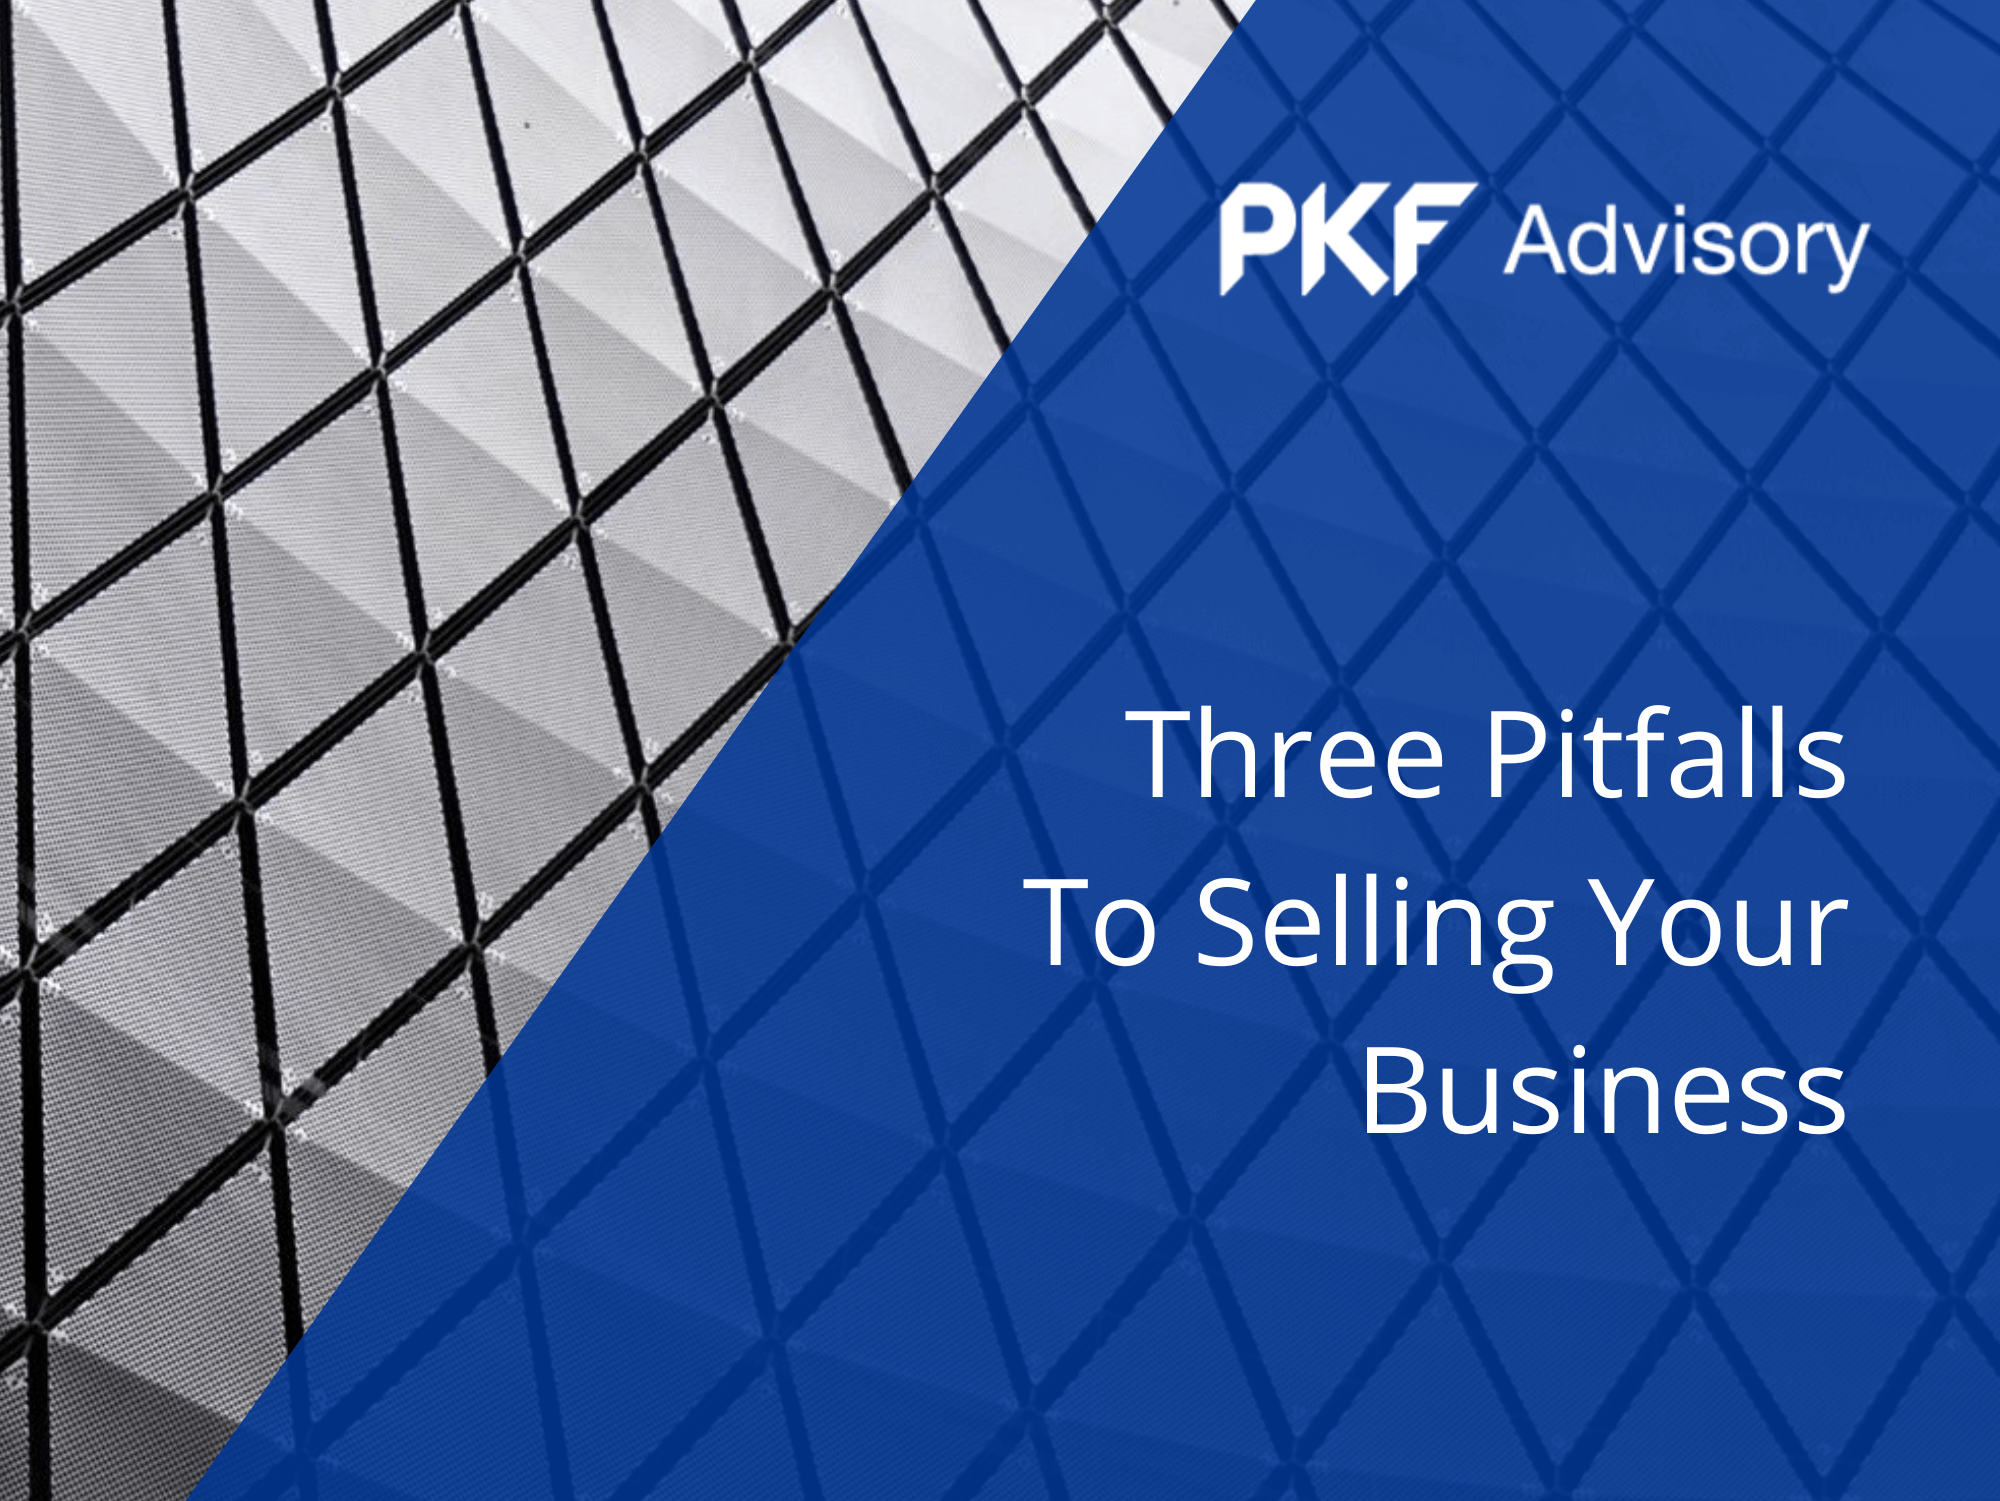 Three Pitfalls to Selling Your Business